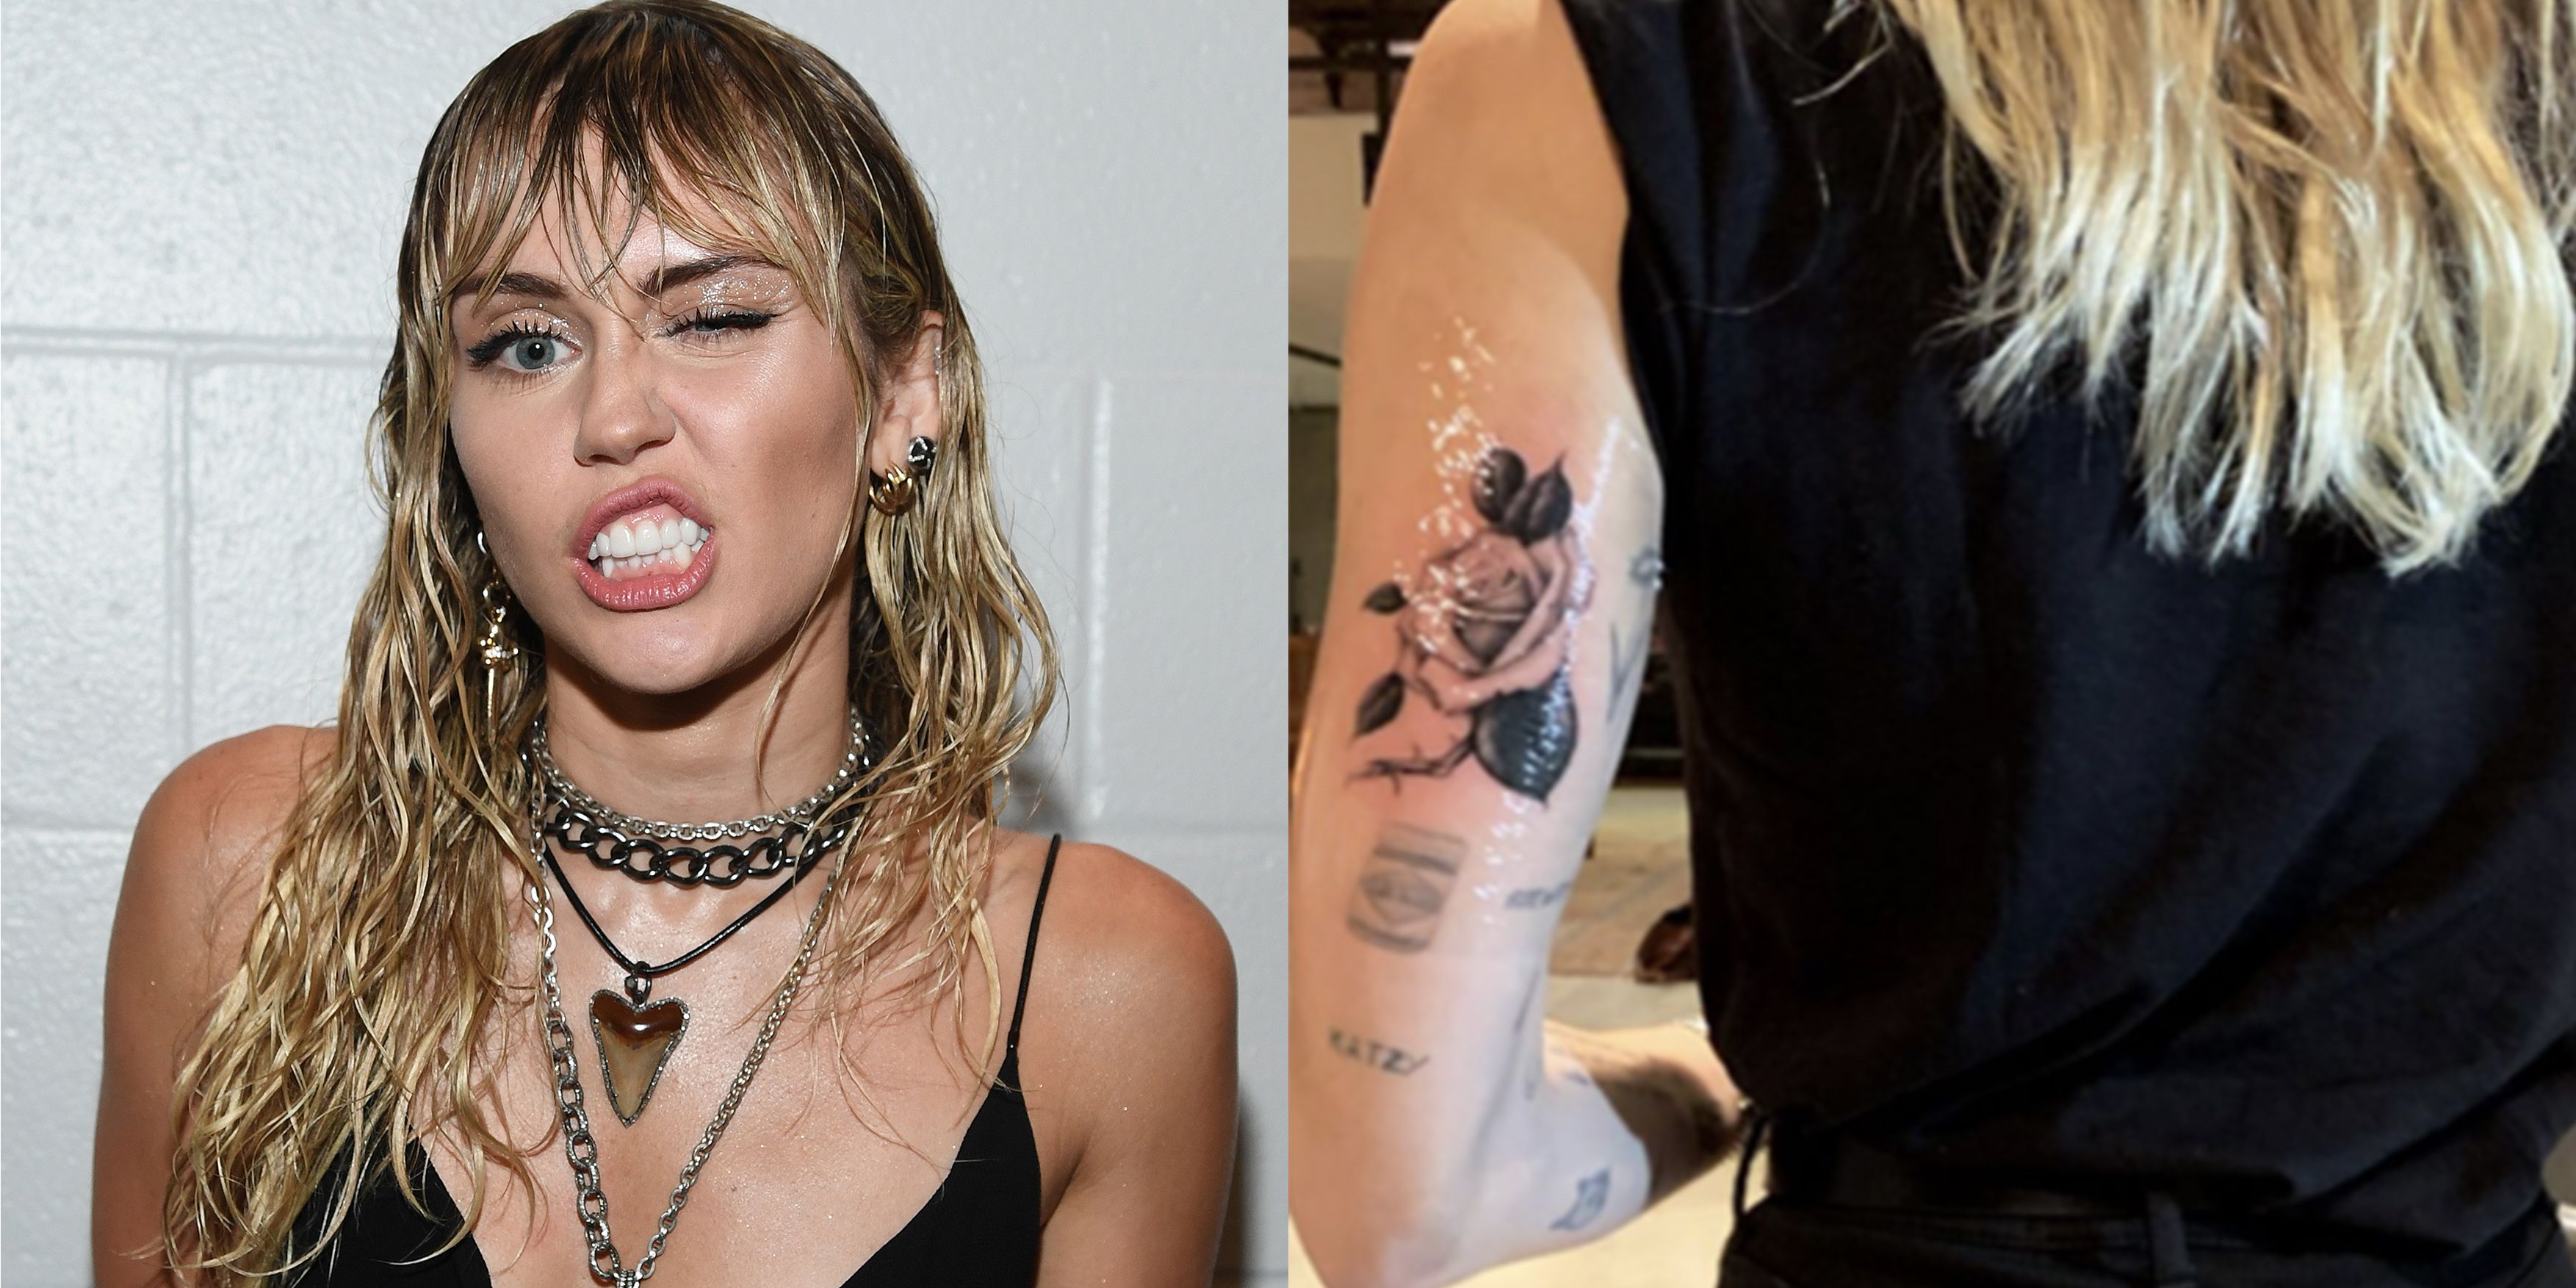 Miley Cyrus Bad Photo Sex - All of Miley Cyrus' Tattoos â€“ Miley Cyrus Tattoos and Their ...